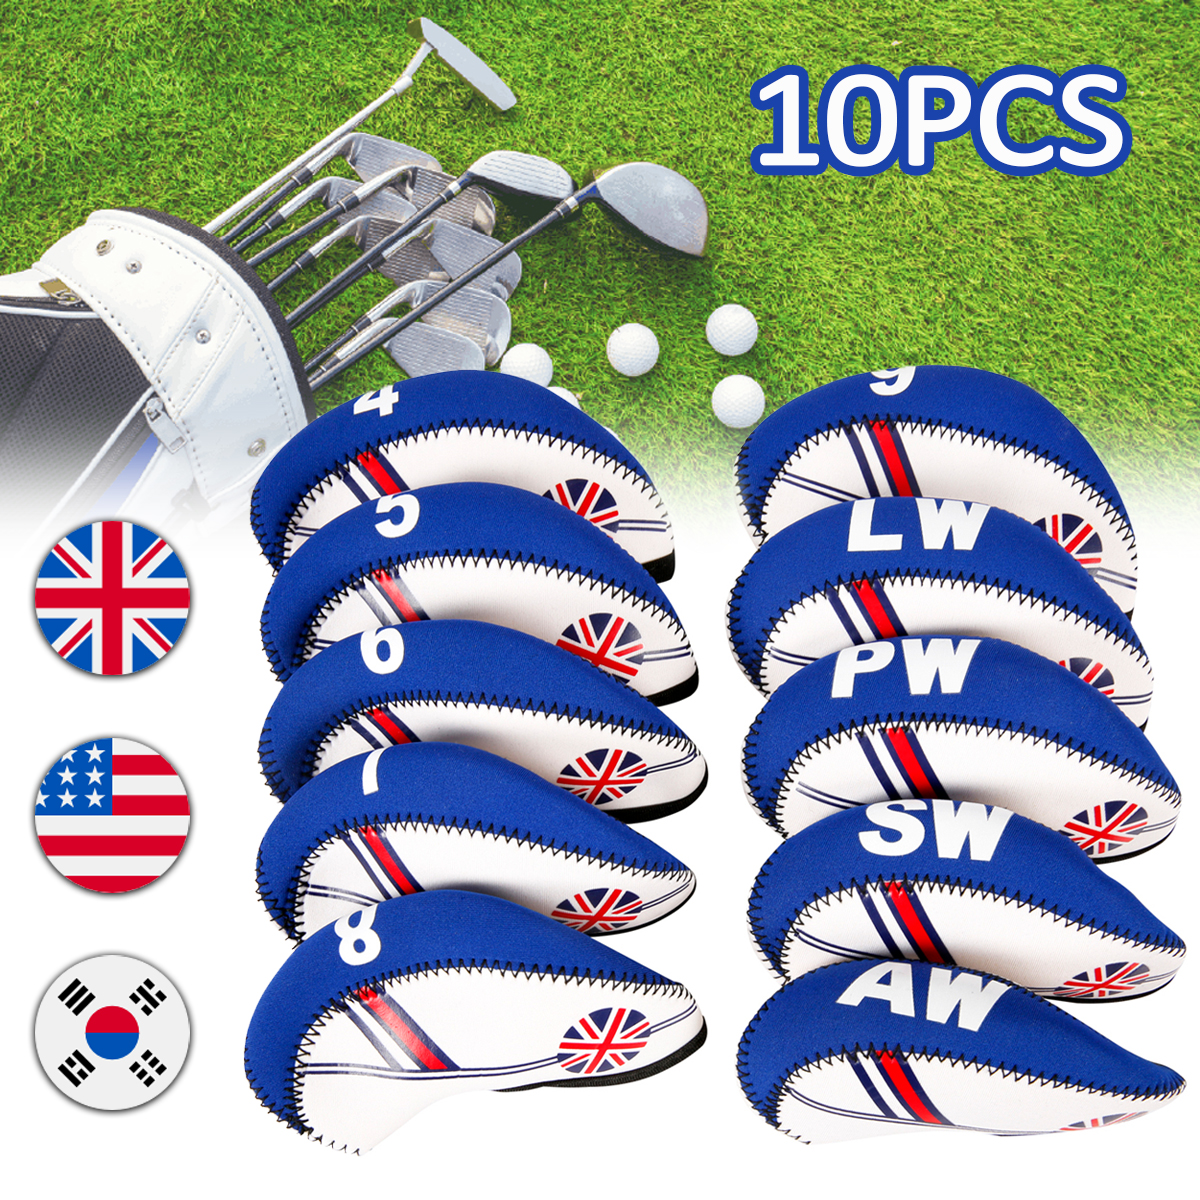 10Pcsset-Golf-Club-Iron-Head-Cover-Headcover-Neoprene-Protect-Set-National-Flag-Headcover-1469336-1